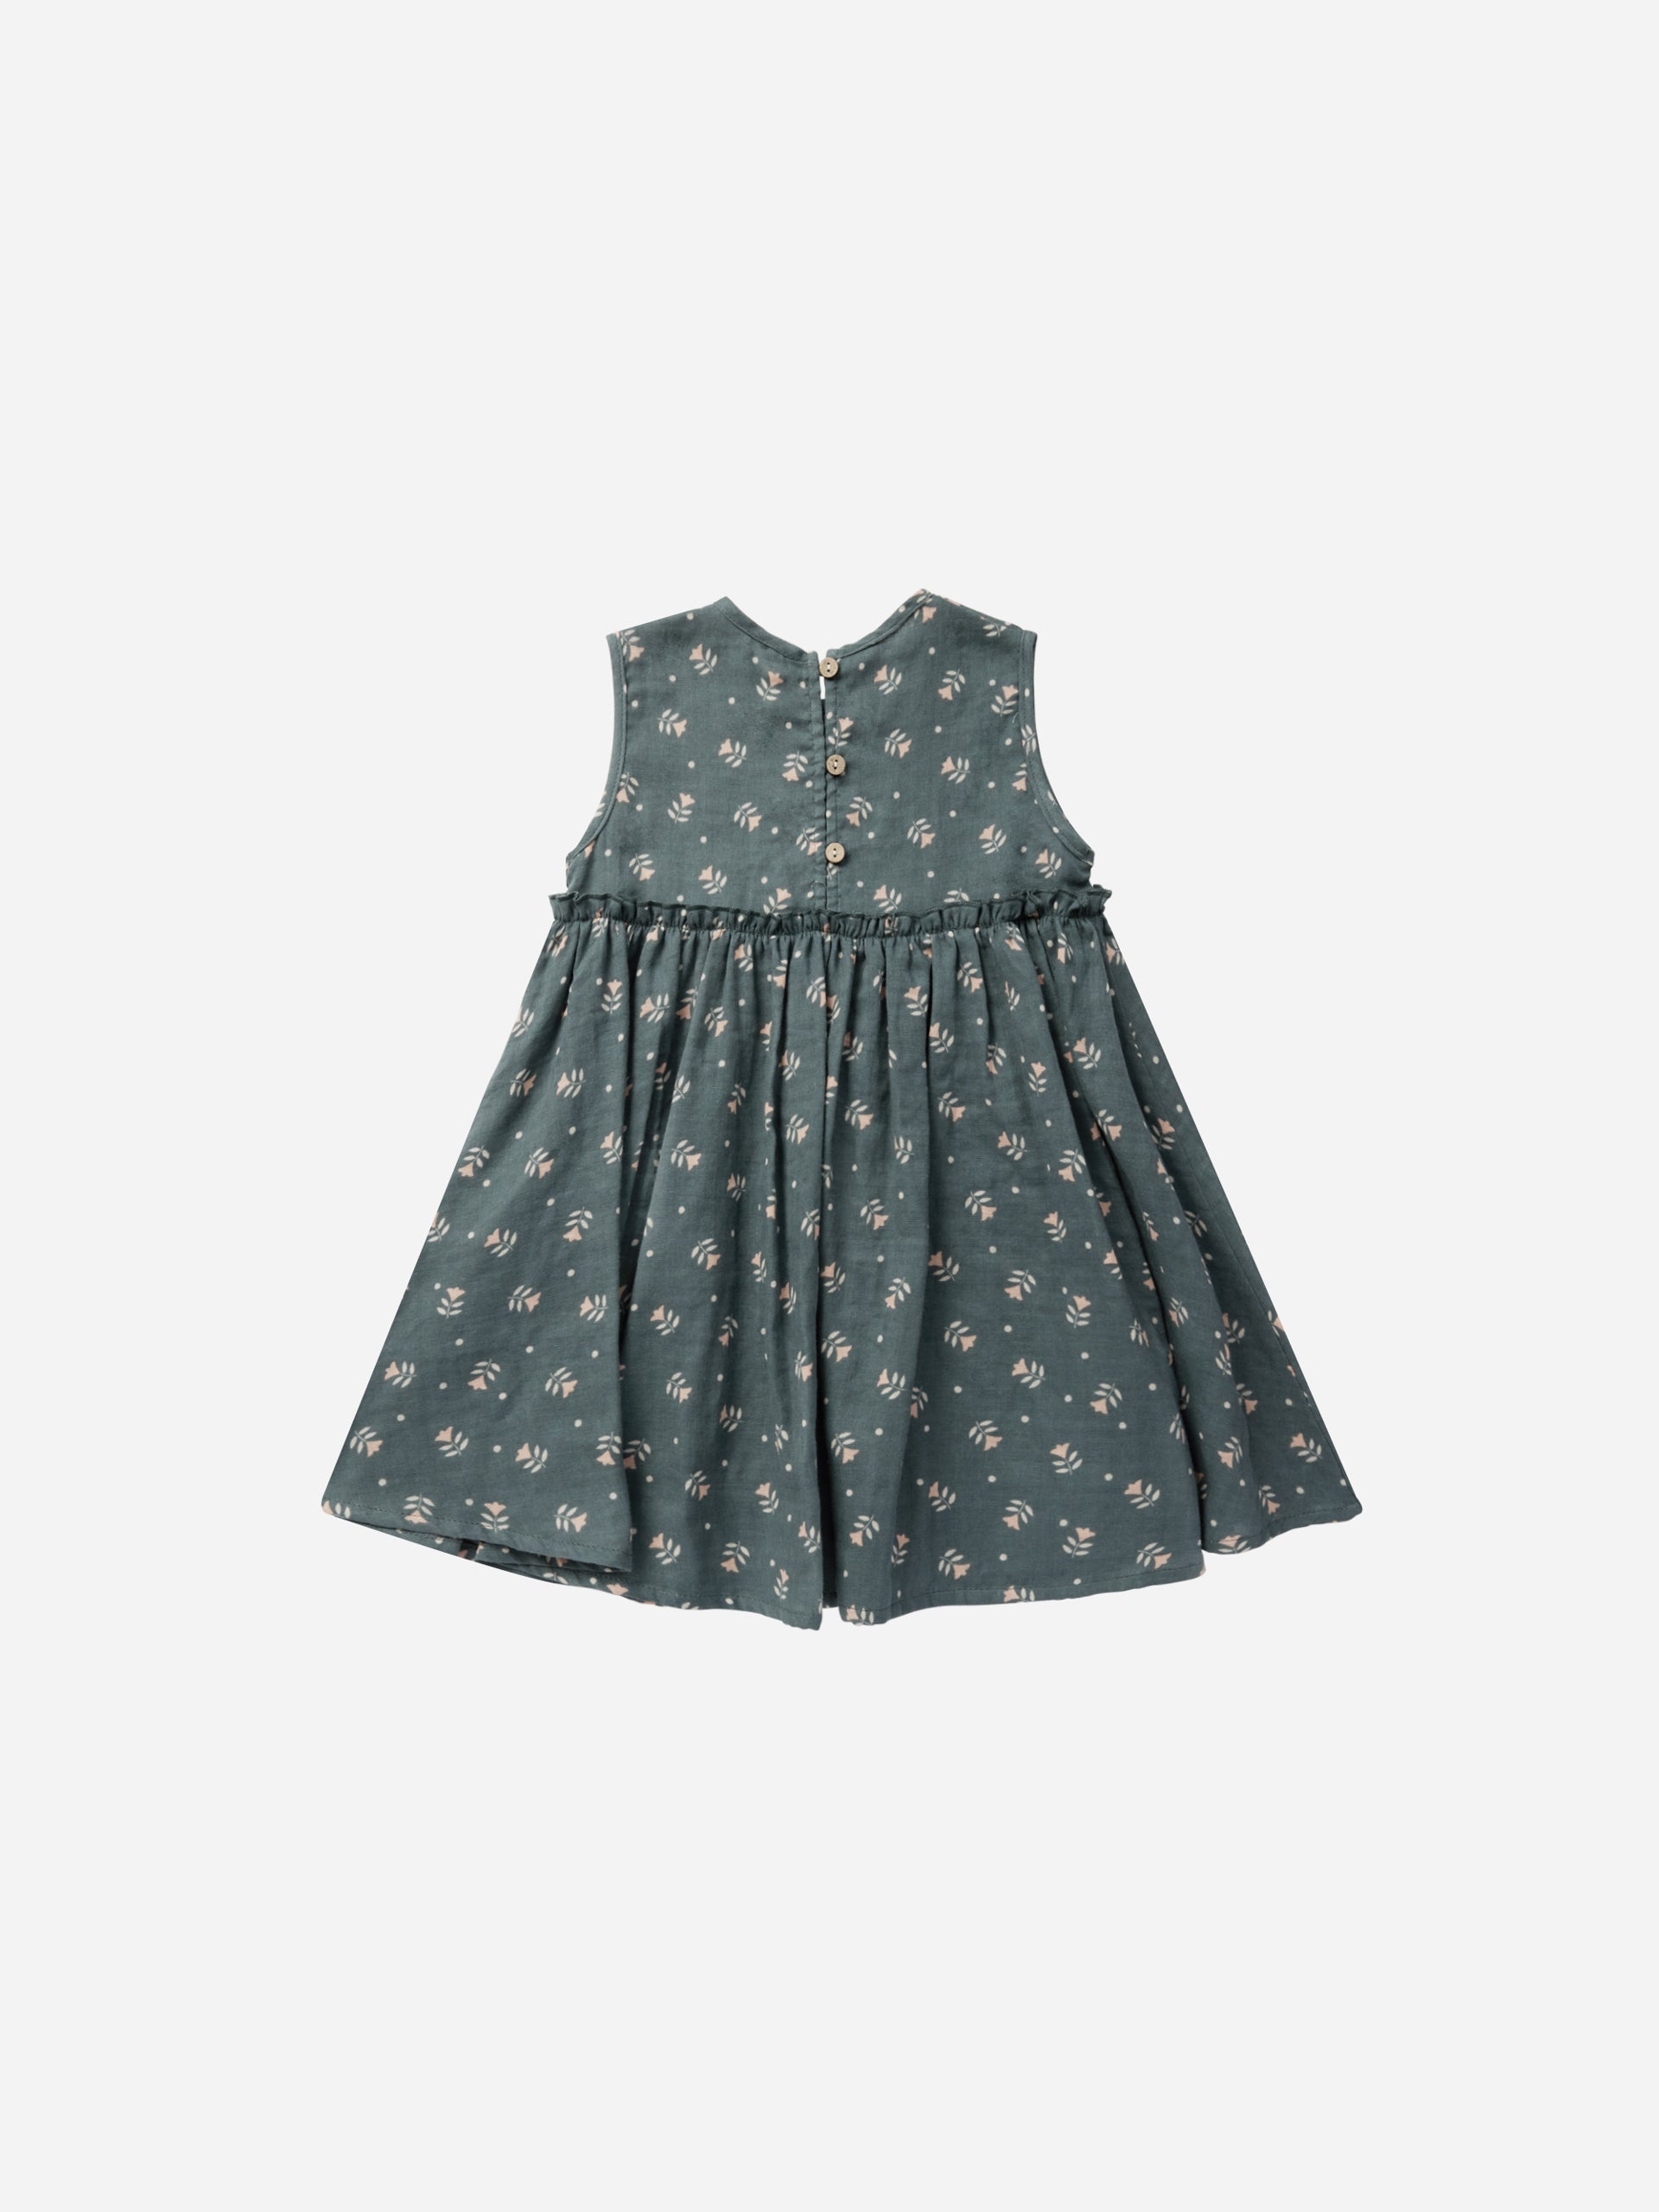 Harper Dress || Morning Glory - Rylee + Cru | Kids Clothes | Trendy Baby Clothes | Modern Infant Outfits |